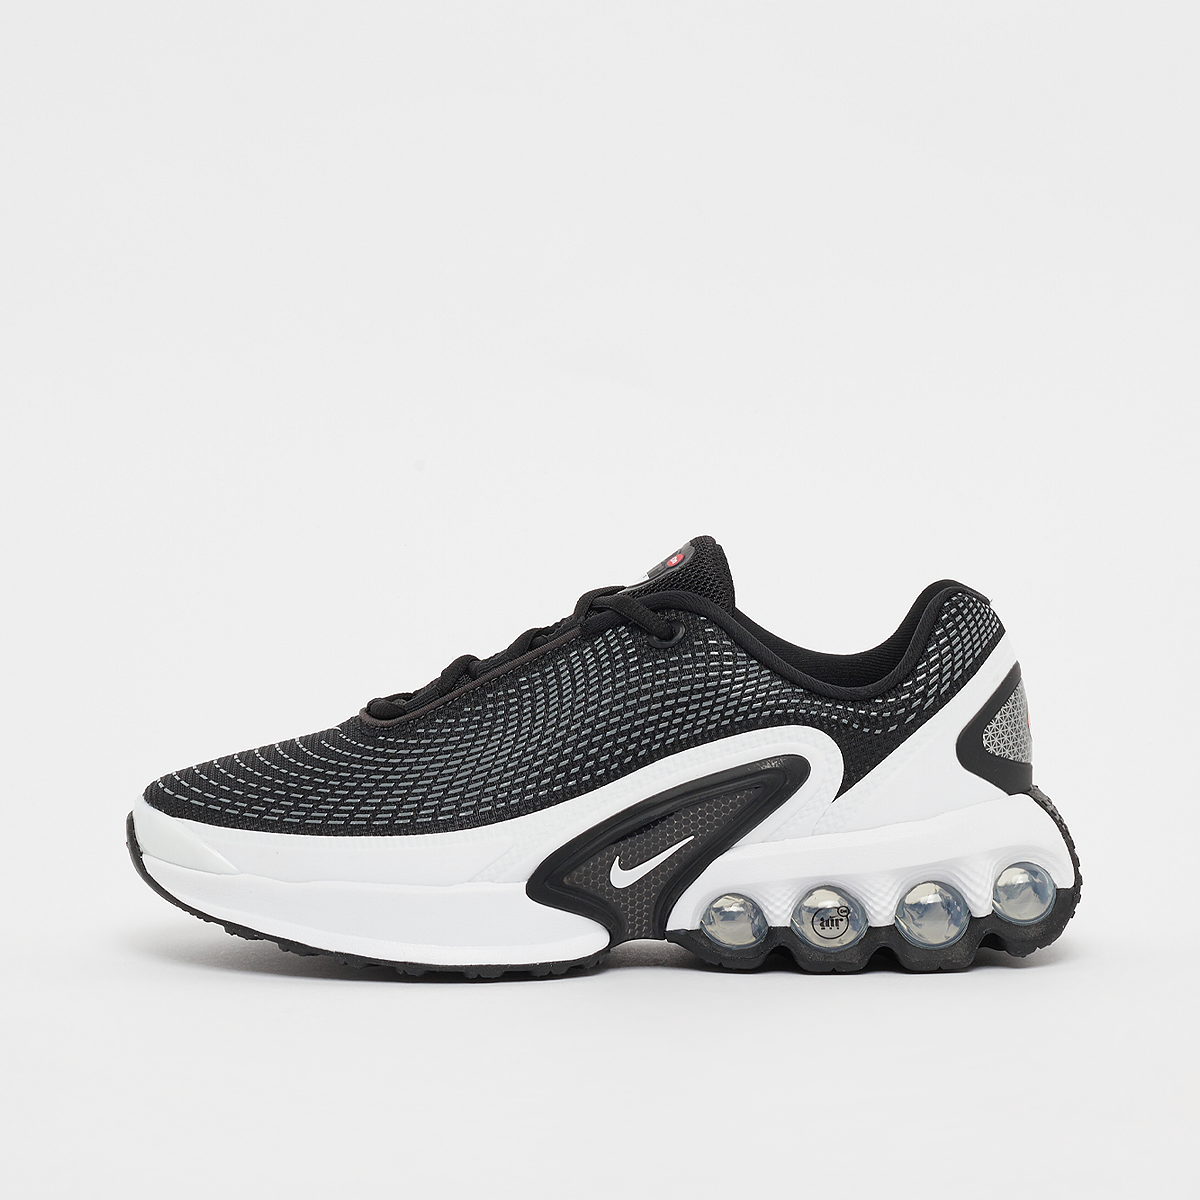 Air Max DN (GS), NIKE, Footwear, black/white-cool grey-antracite, taille: 36